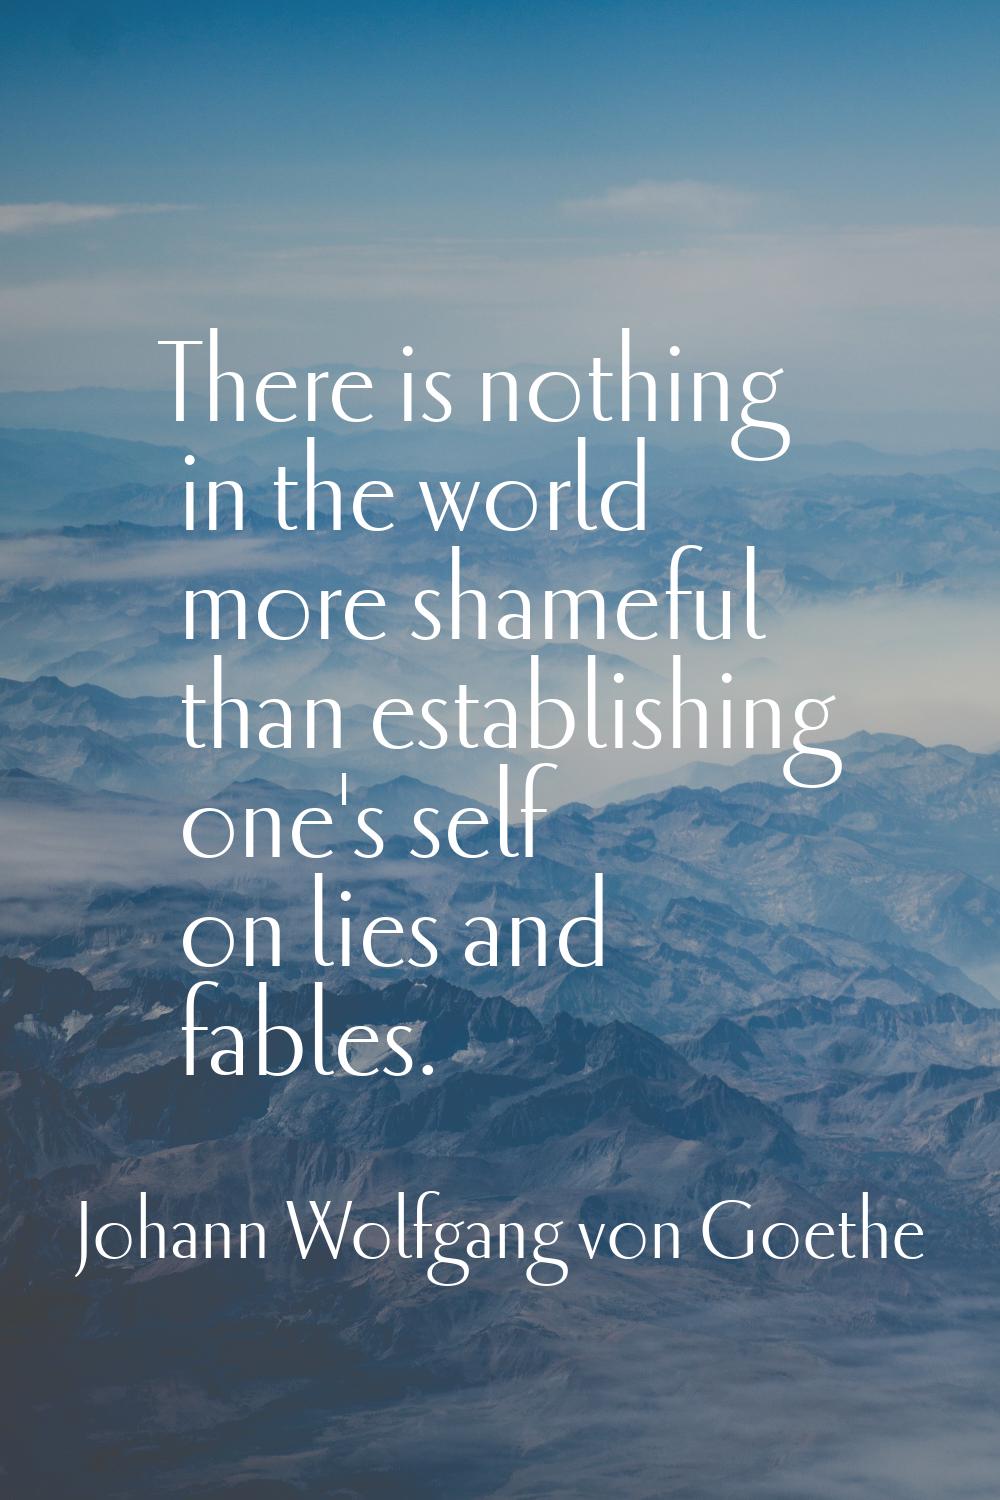 There is nothing in the world more shameful than establishing one's self on lies and fables.